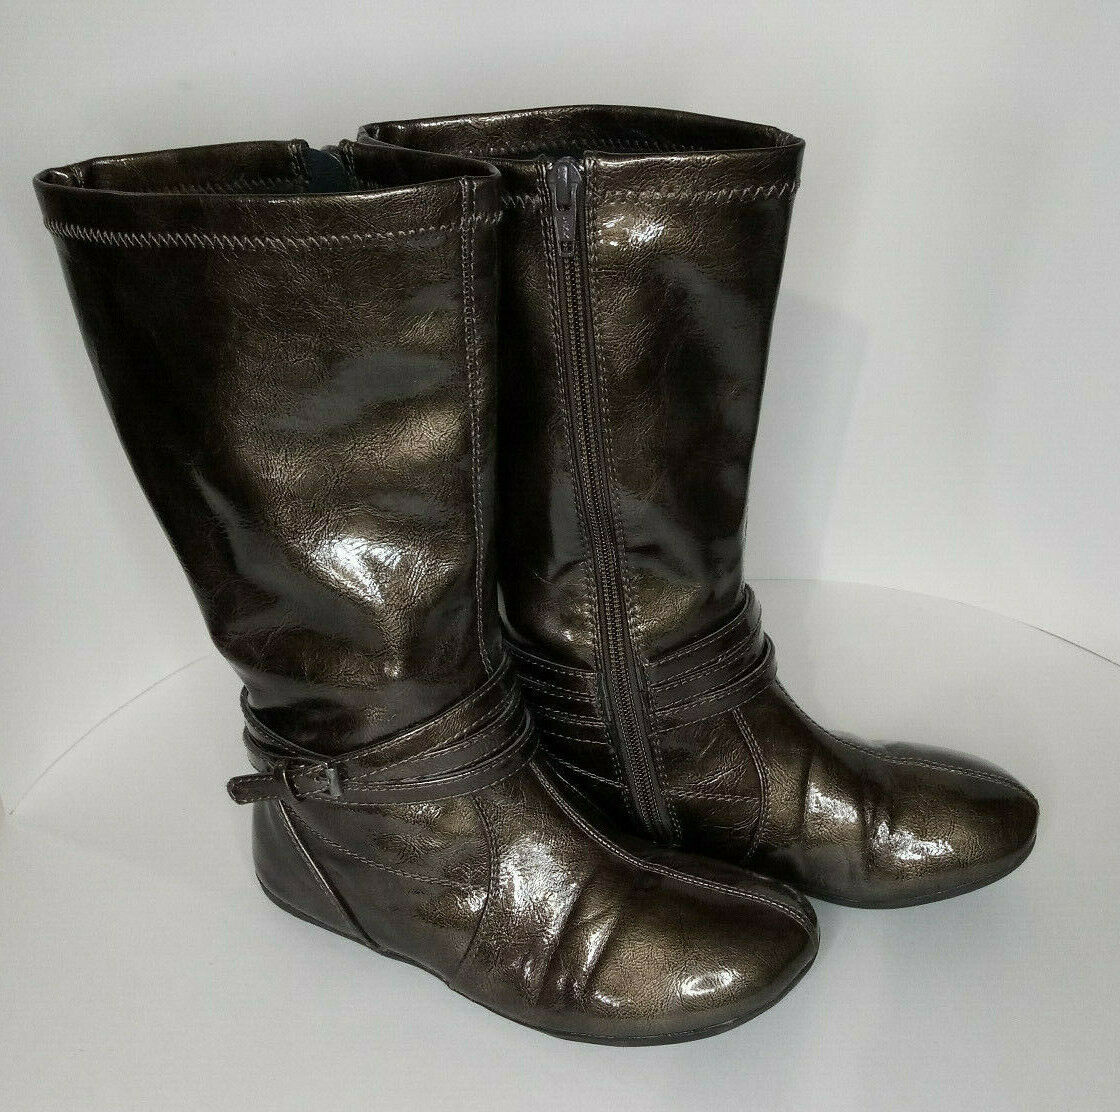 Youth Sz 2 Nordstrom Bronze Riding Boots Zip side buckle strap a